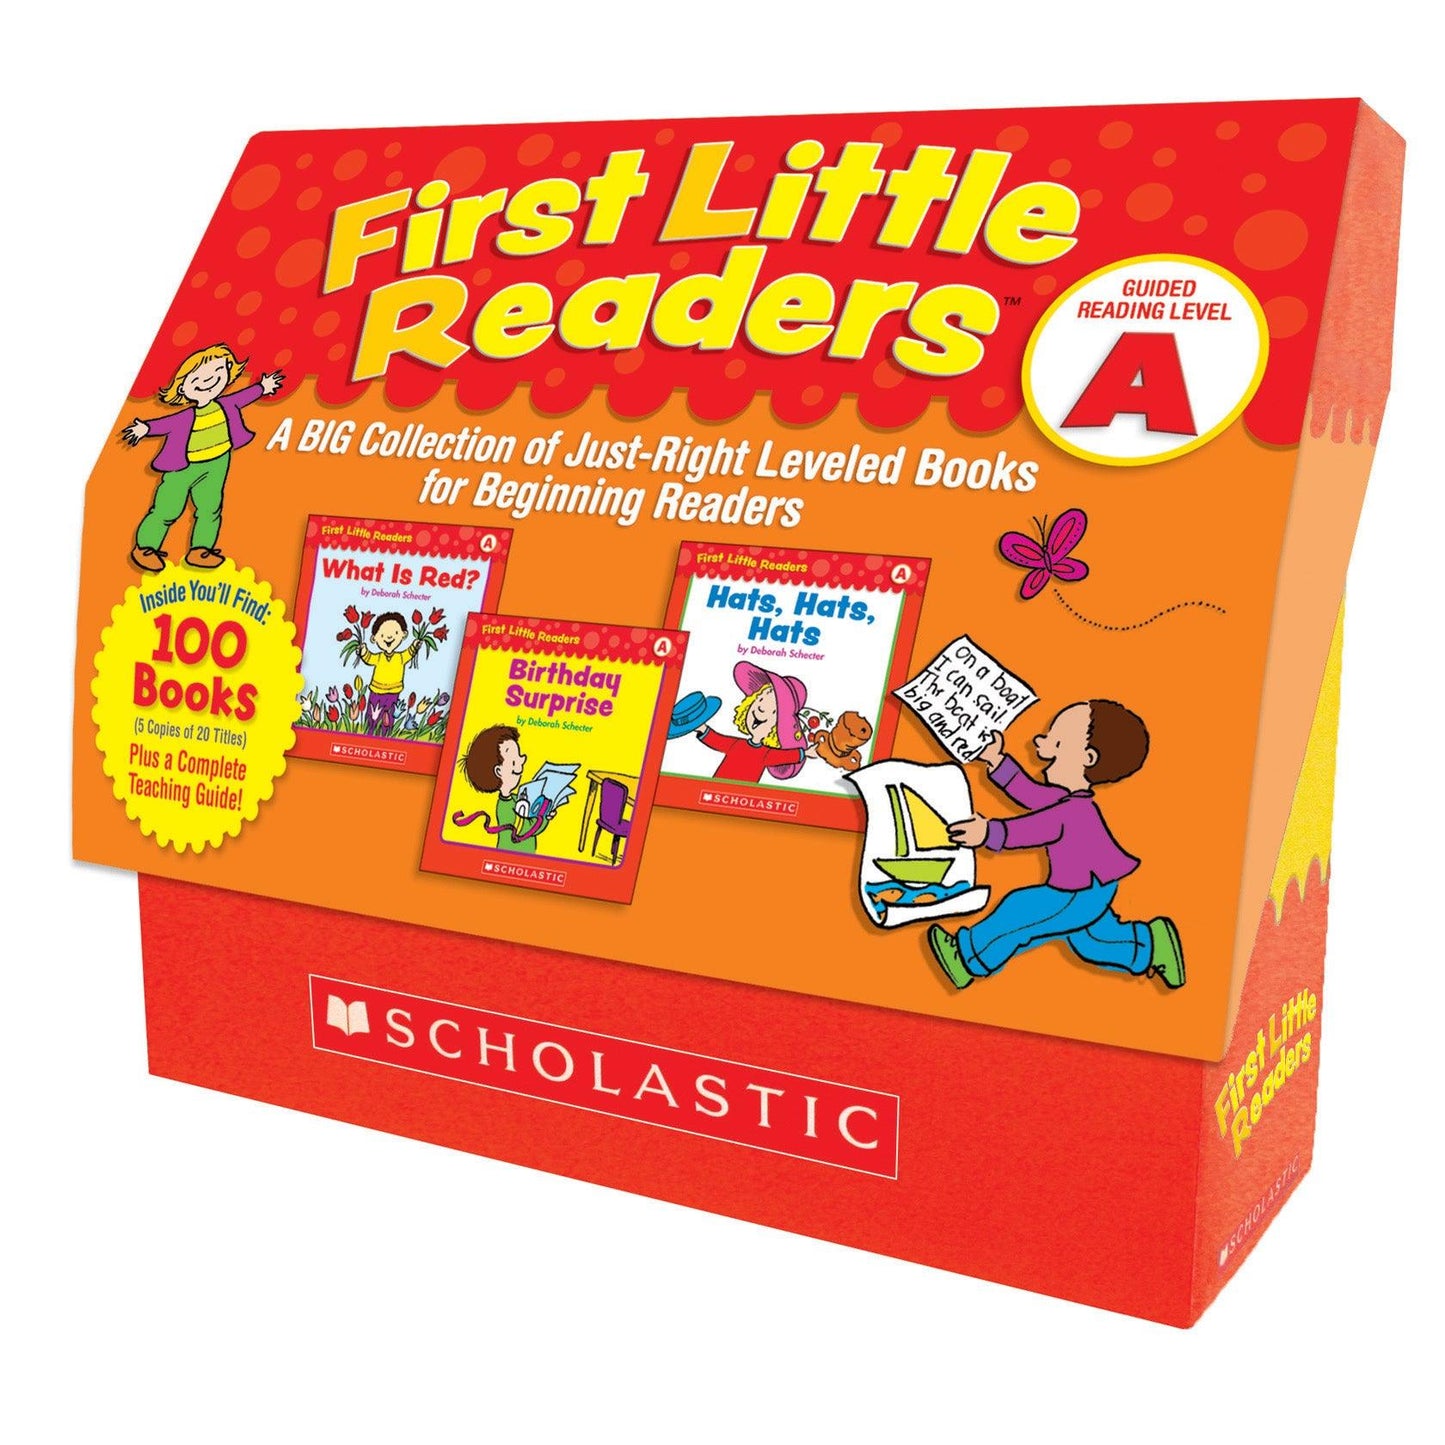 First Little Readers Books, Guided Reading Level A, 5 Copies of 20 Titles - Loomini